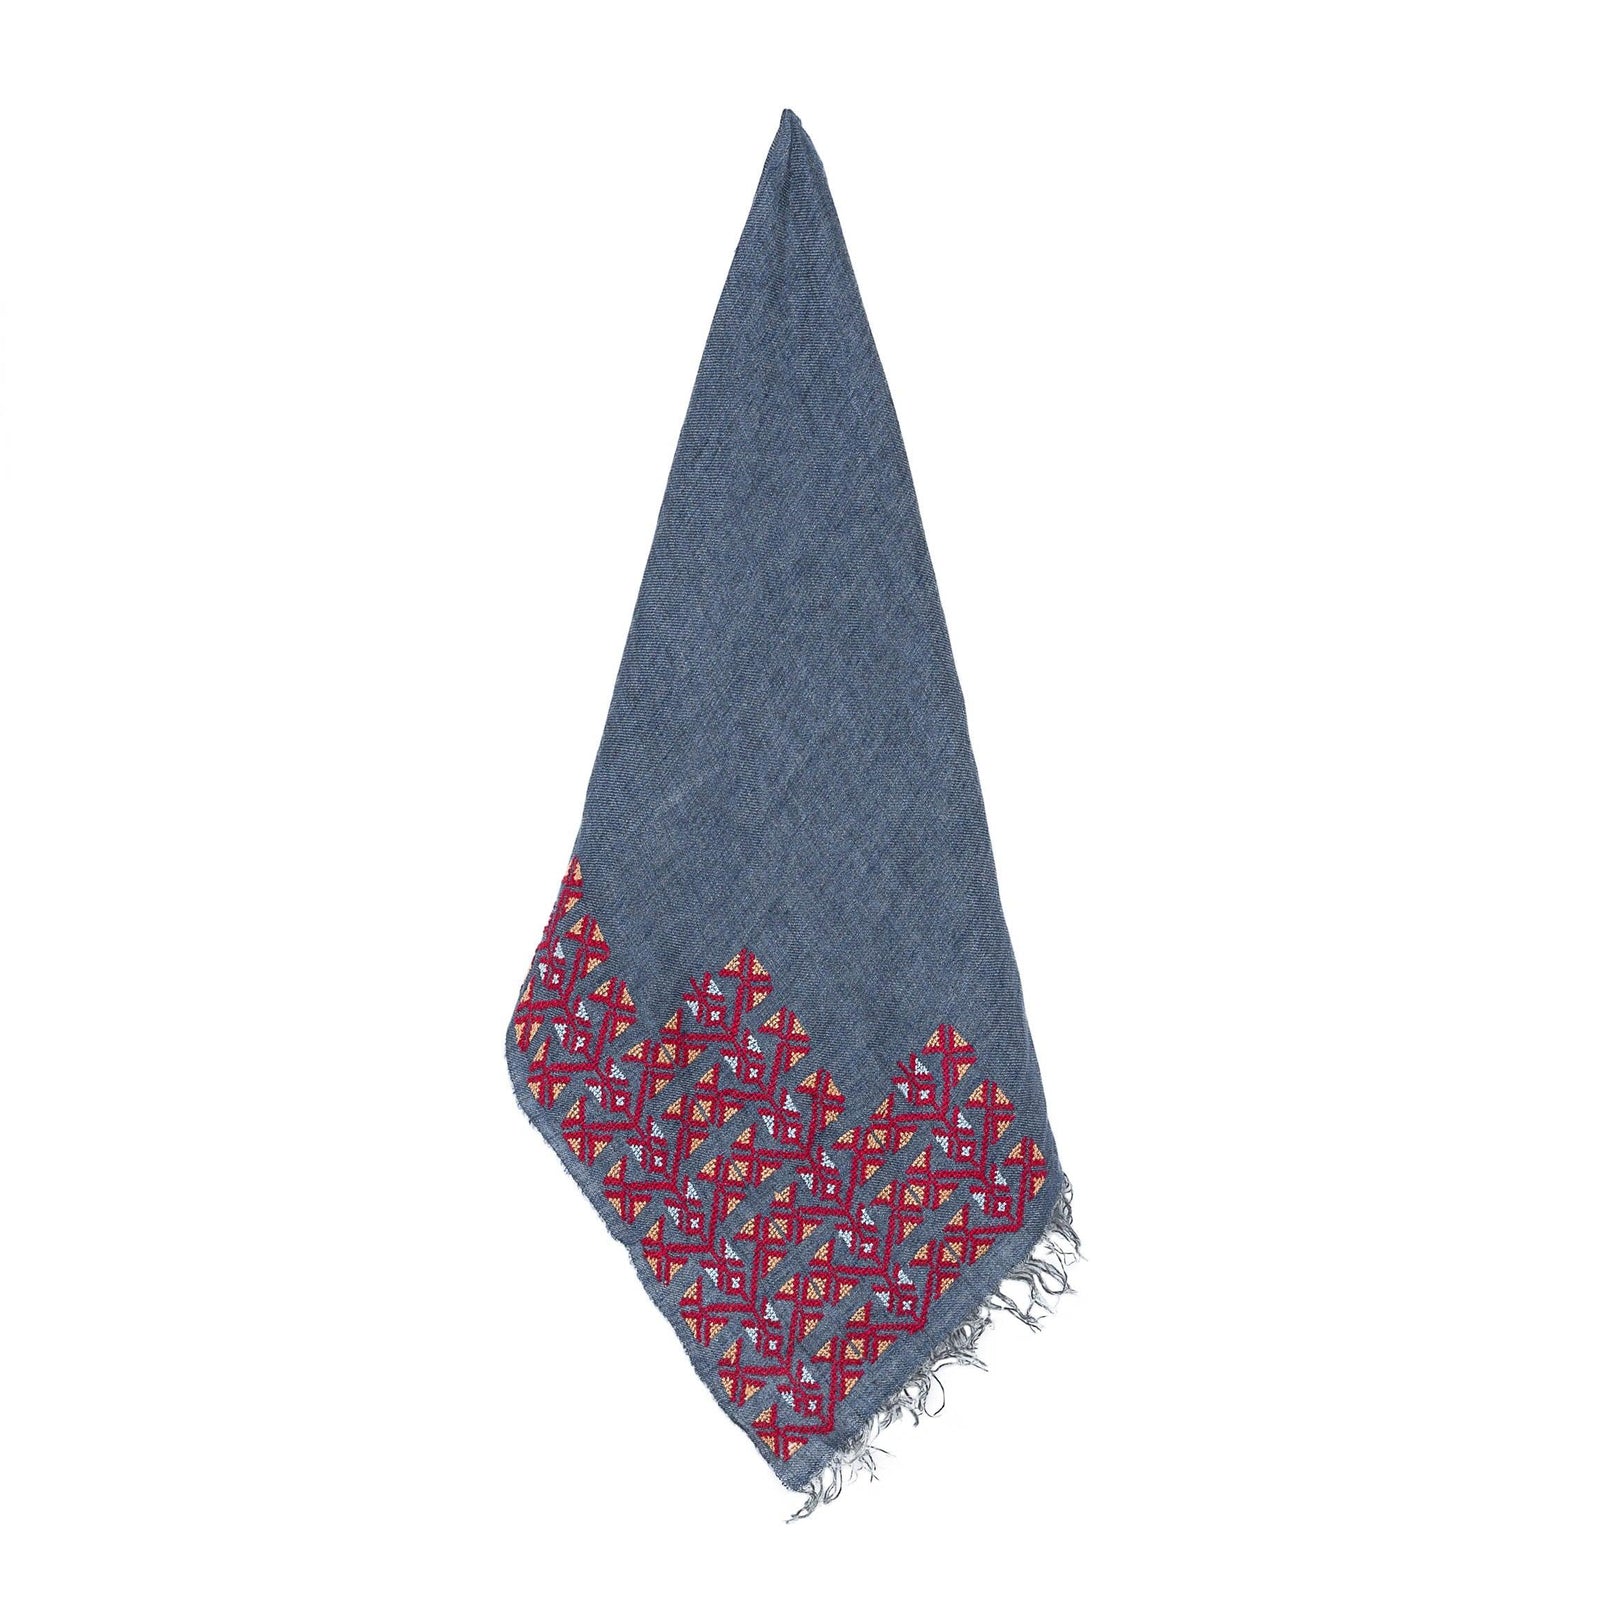 BLUE LINEN SHAWL - MADE51 X UNHCR Limited Edition